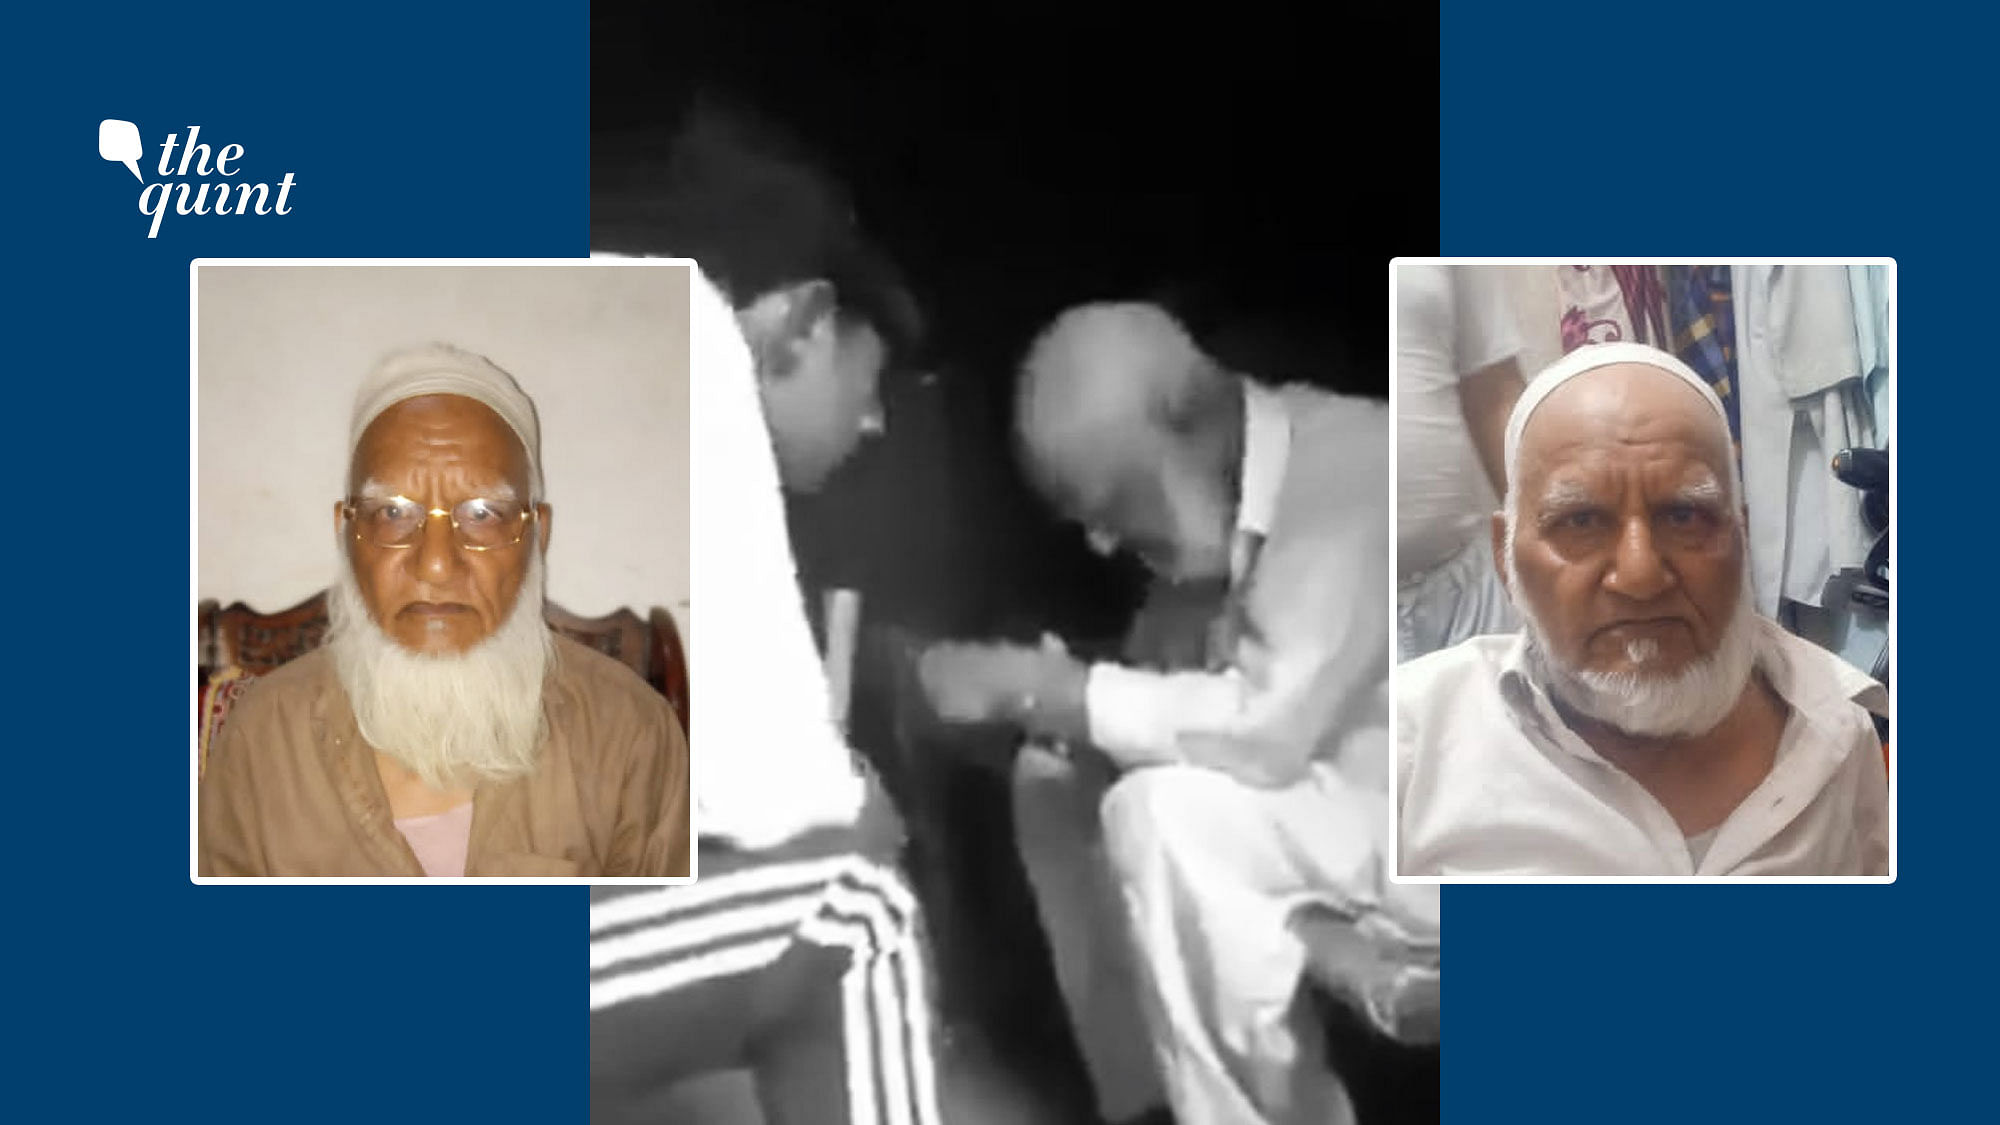 The accused cut off 72-year-old Saifi’s beard, forced him to chant Jai Sri Ram, and assaulted him for four hours in Uttar Pradesh’s Loni.